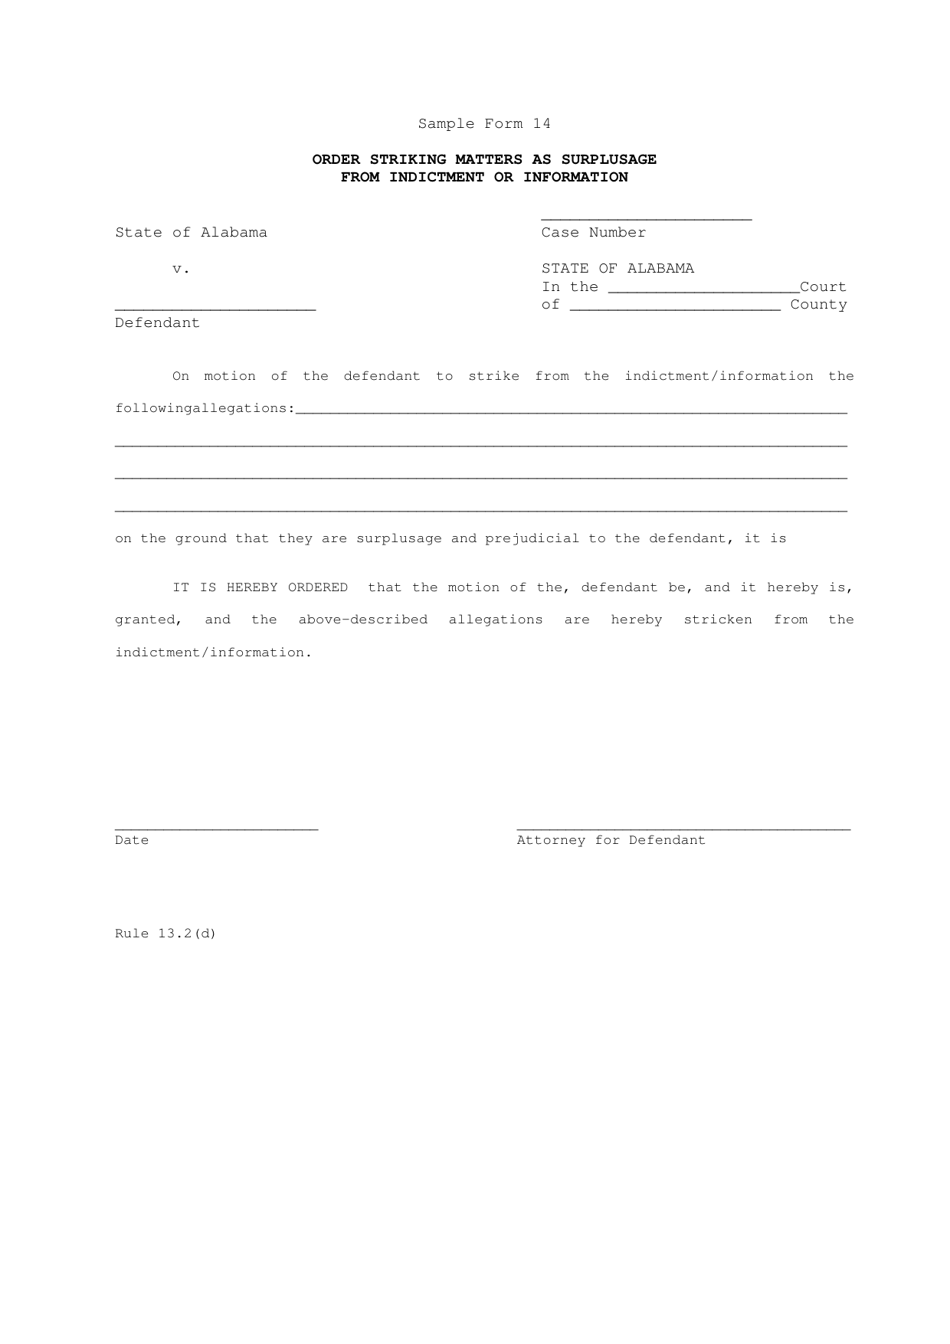 Sample Form 14 Order Striking Matters as Surplusage From Indictment or Information - Alabama, Page 1